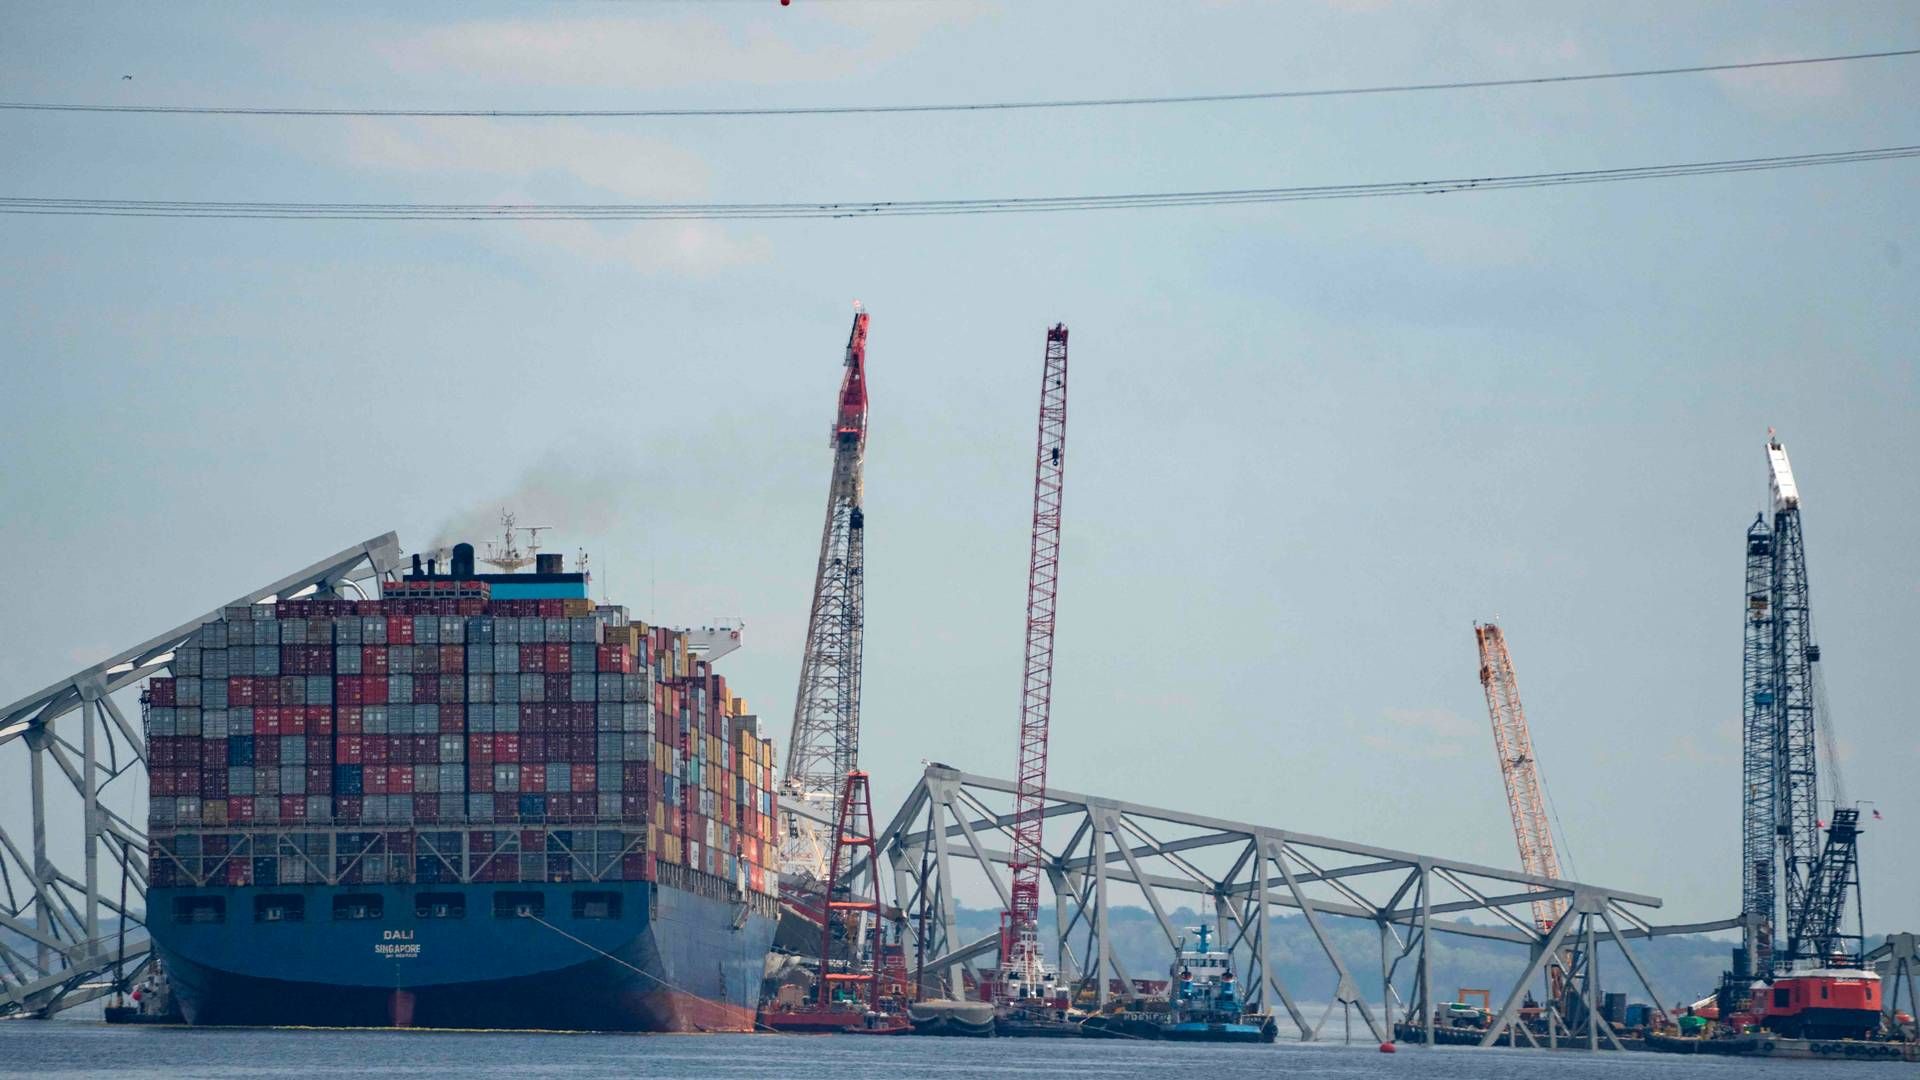 Shortly before the ship sailed into the Francis Scott Key Bridge in Baltimore, Maryland, the crew issued a distress signal reporting a power failure and lack of propulsion. Now authorities are focusing on the ship's power supply. | Photo: Kent Nishimura/AFP/Ritzau Scanpix